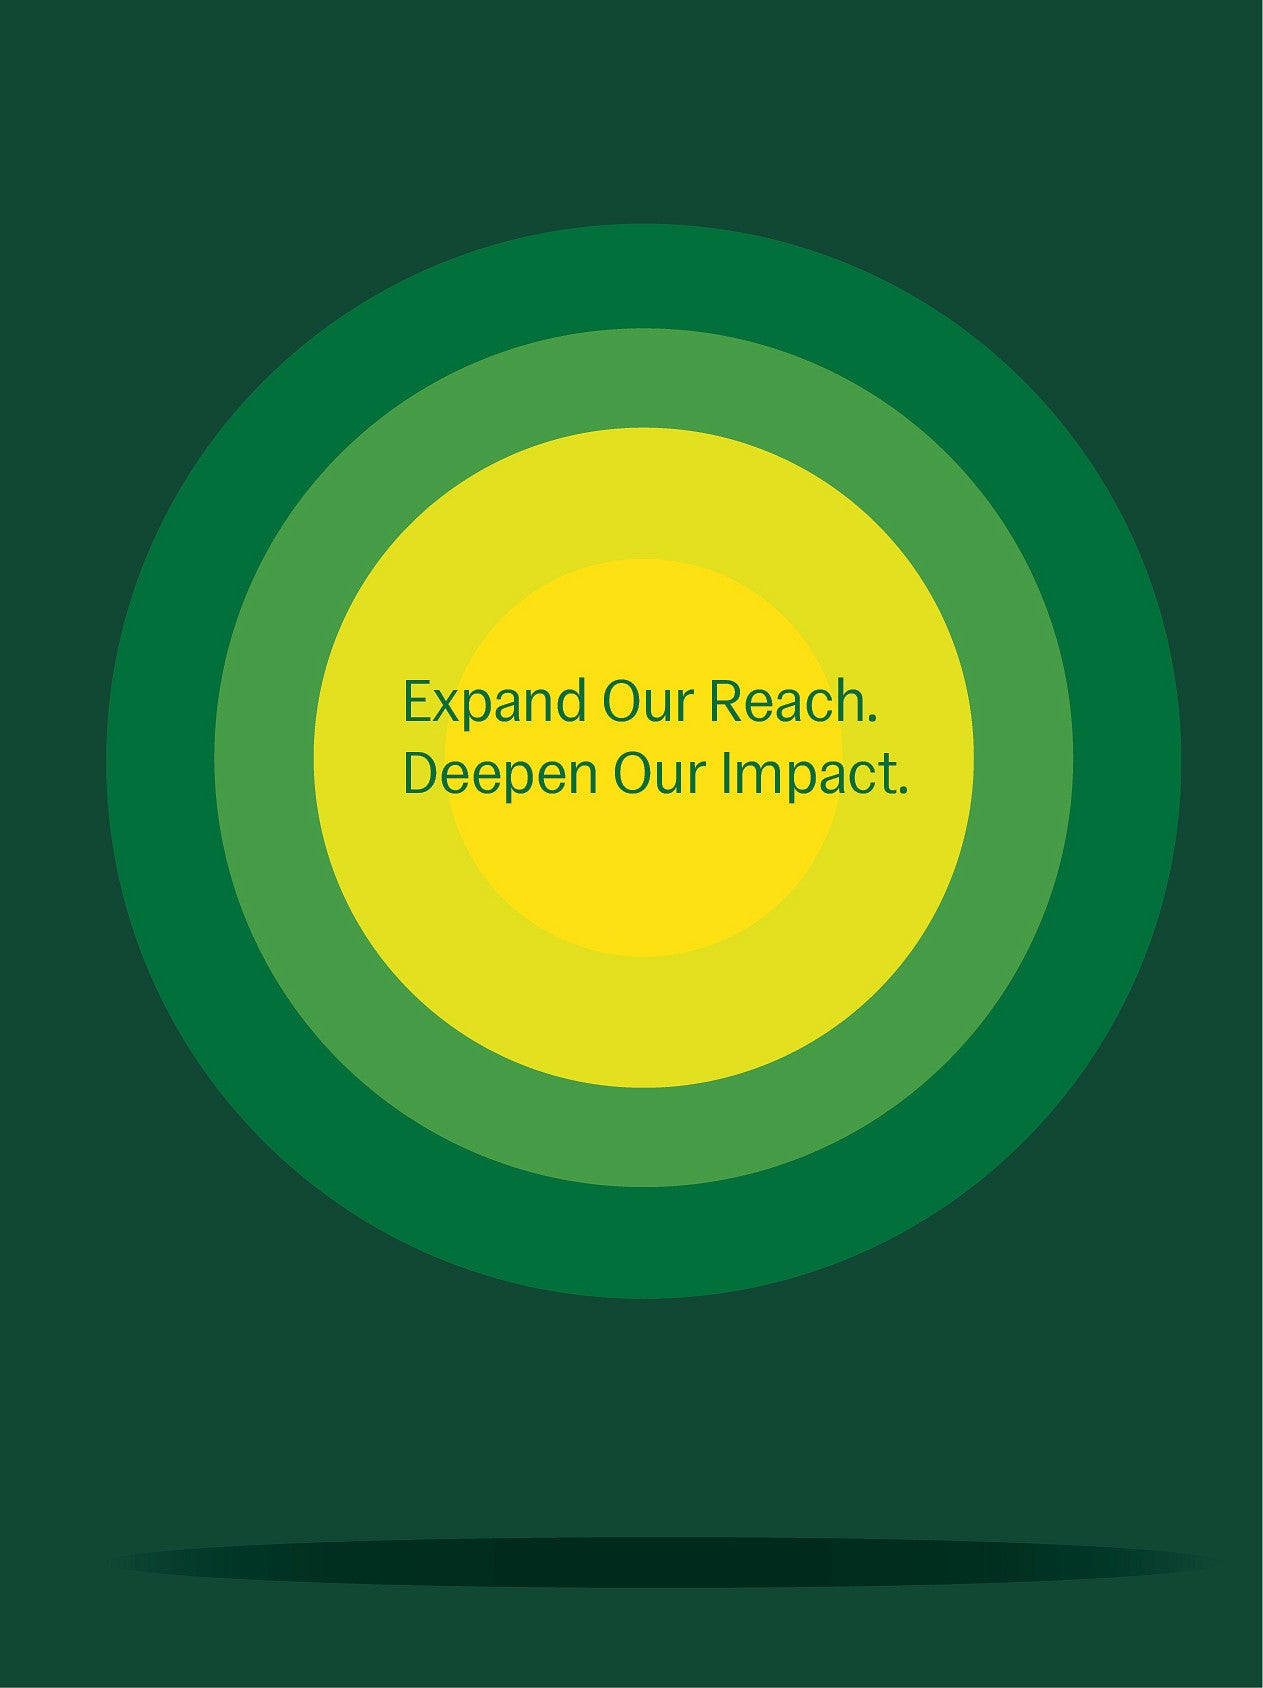 Photo of the strategic plan vision. Shows the words "Expand our Reach. Deepen our Impact." on a green and yellow background.